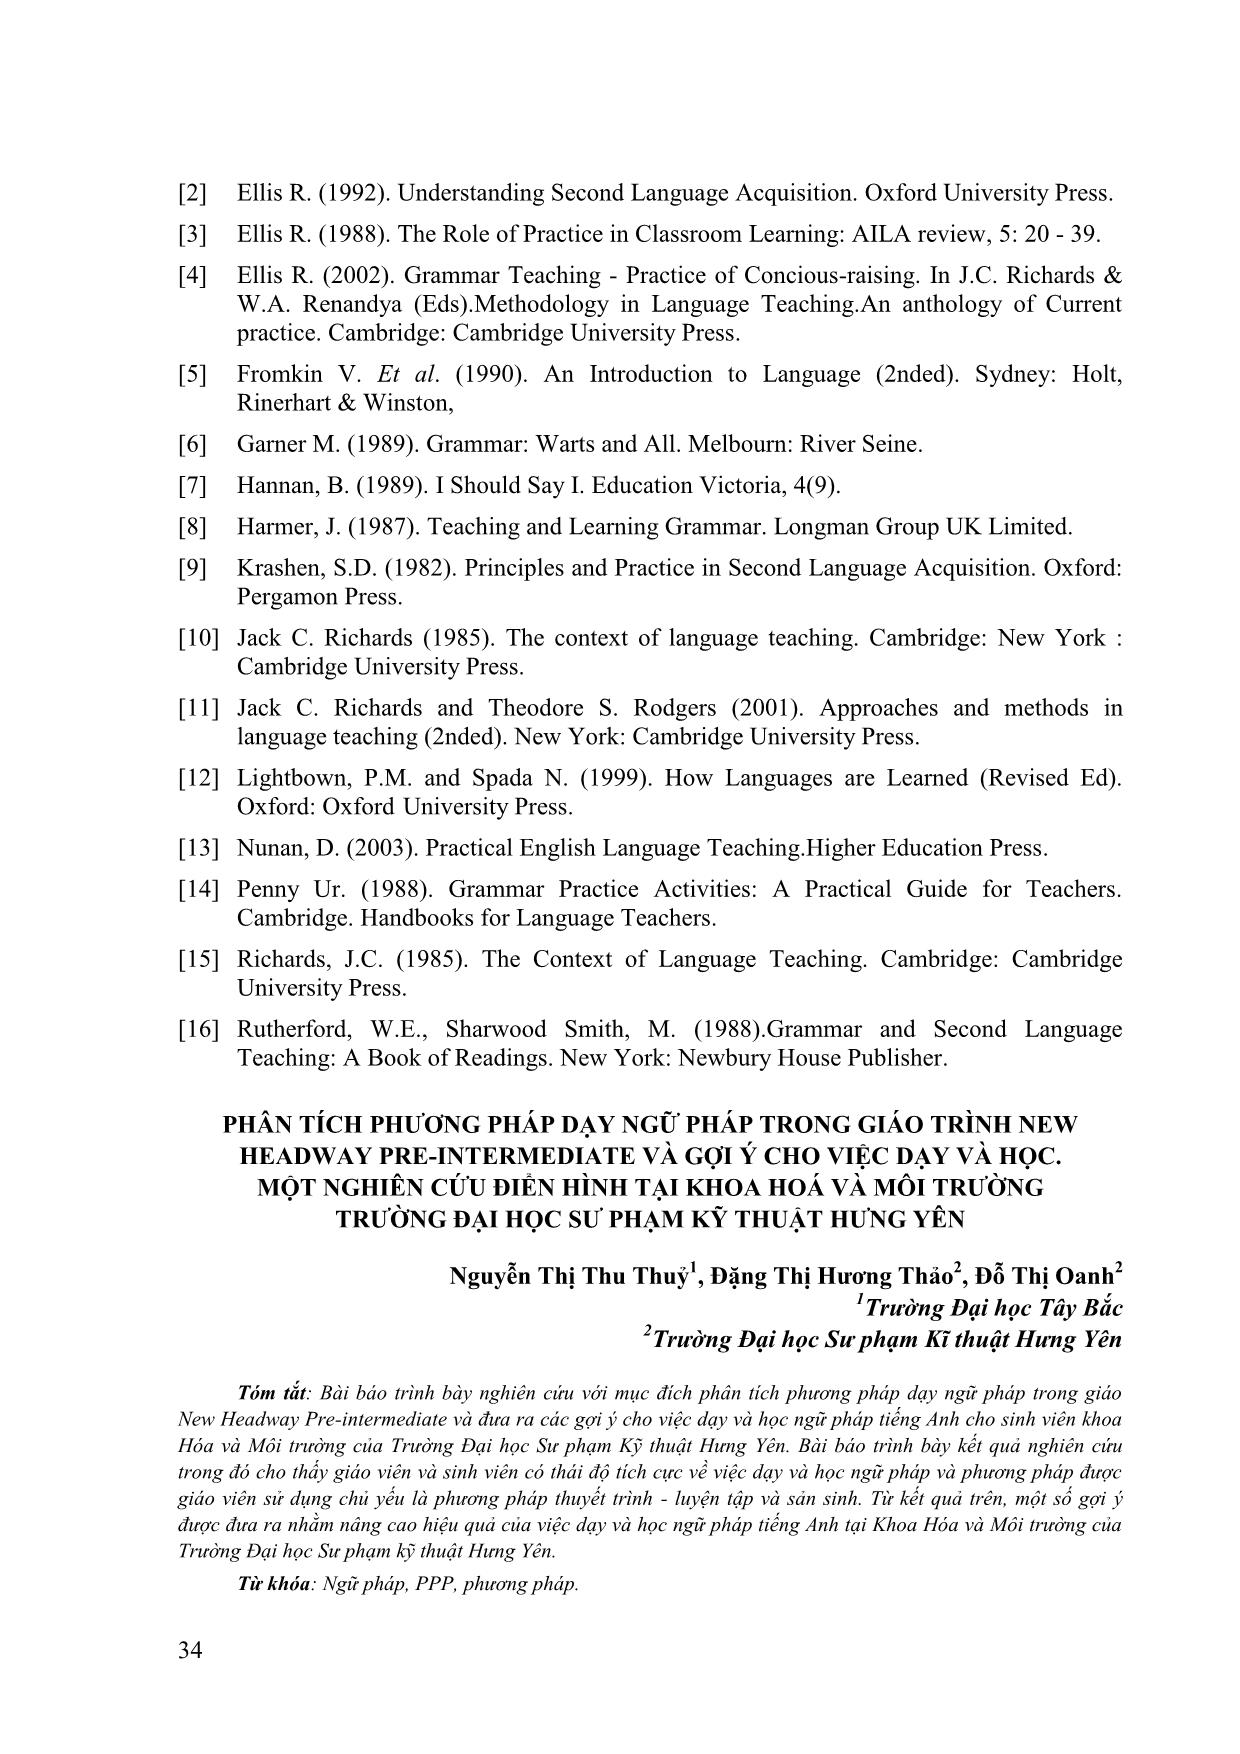 An analysis on grammar approach in the textbook new headway pre-Intermediate and implications for teaching and learning. A cacse study in the department of chemistry and environment of Hung Yen universityof technology and education trang 9